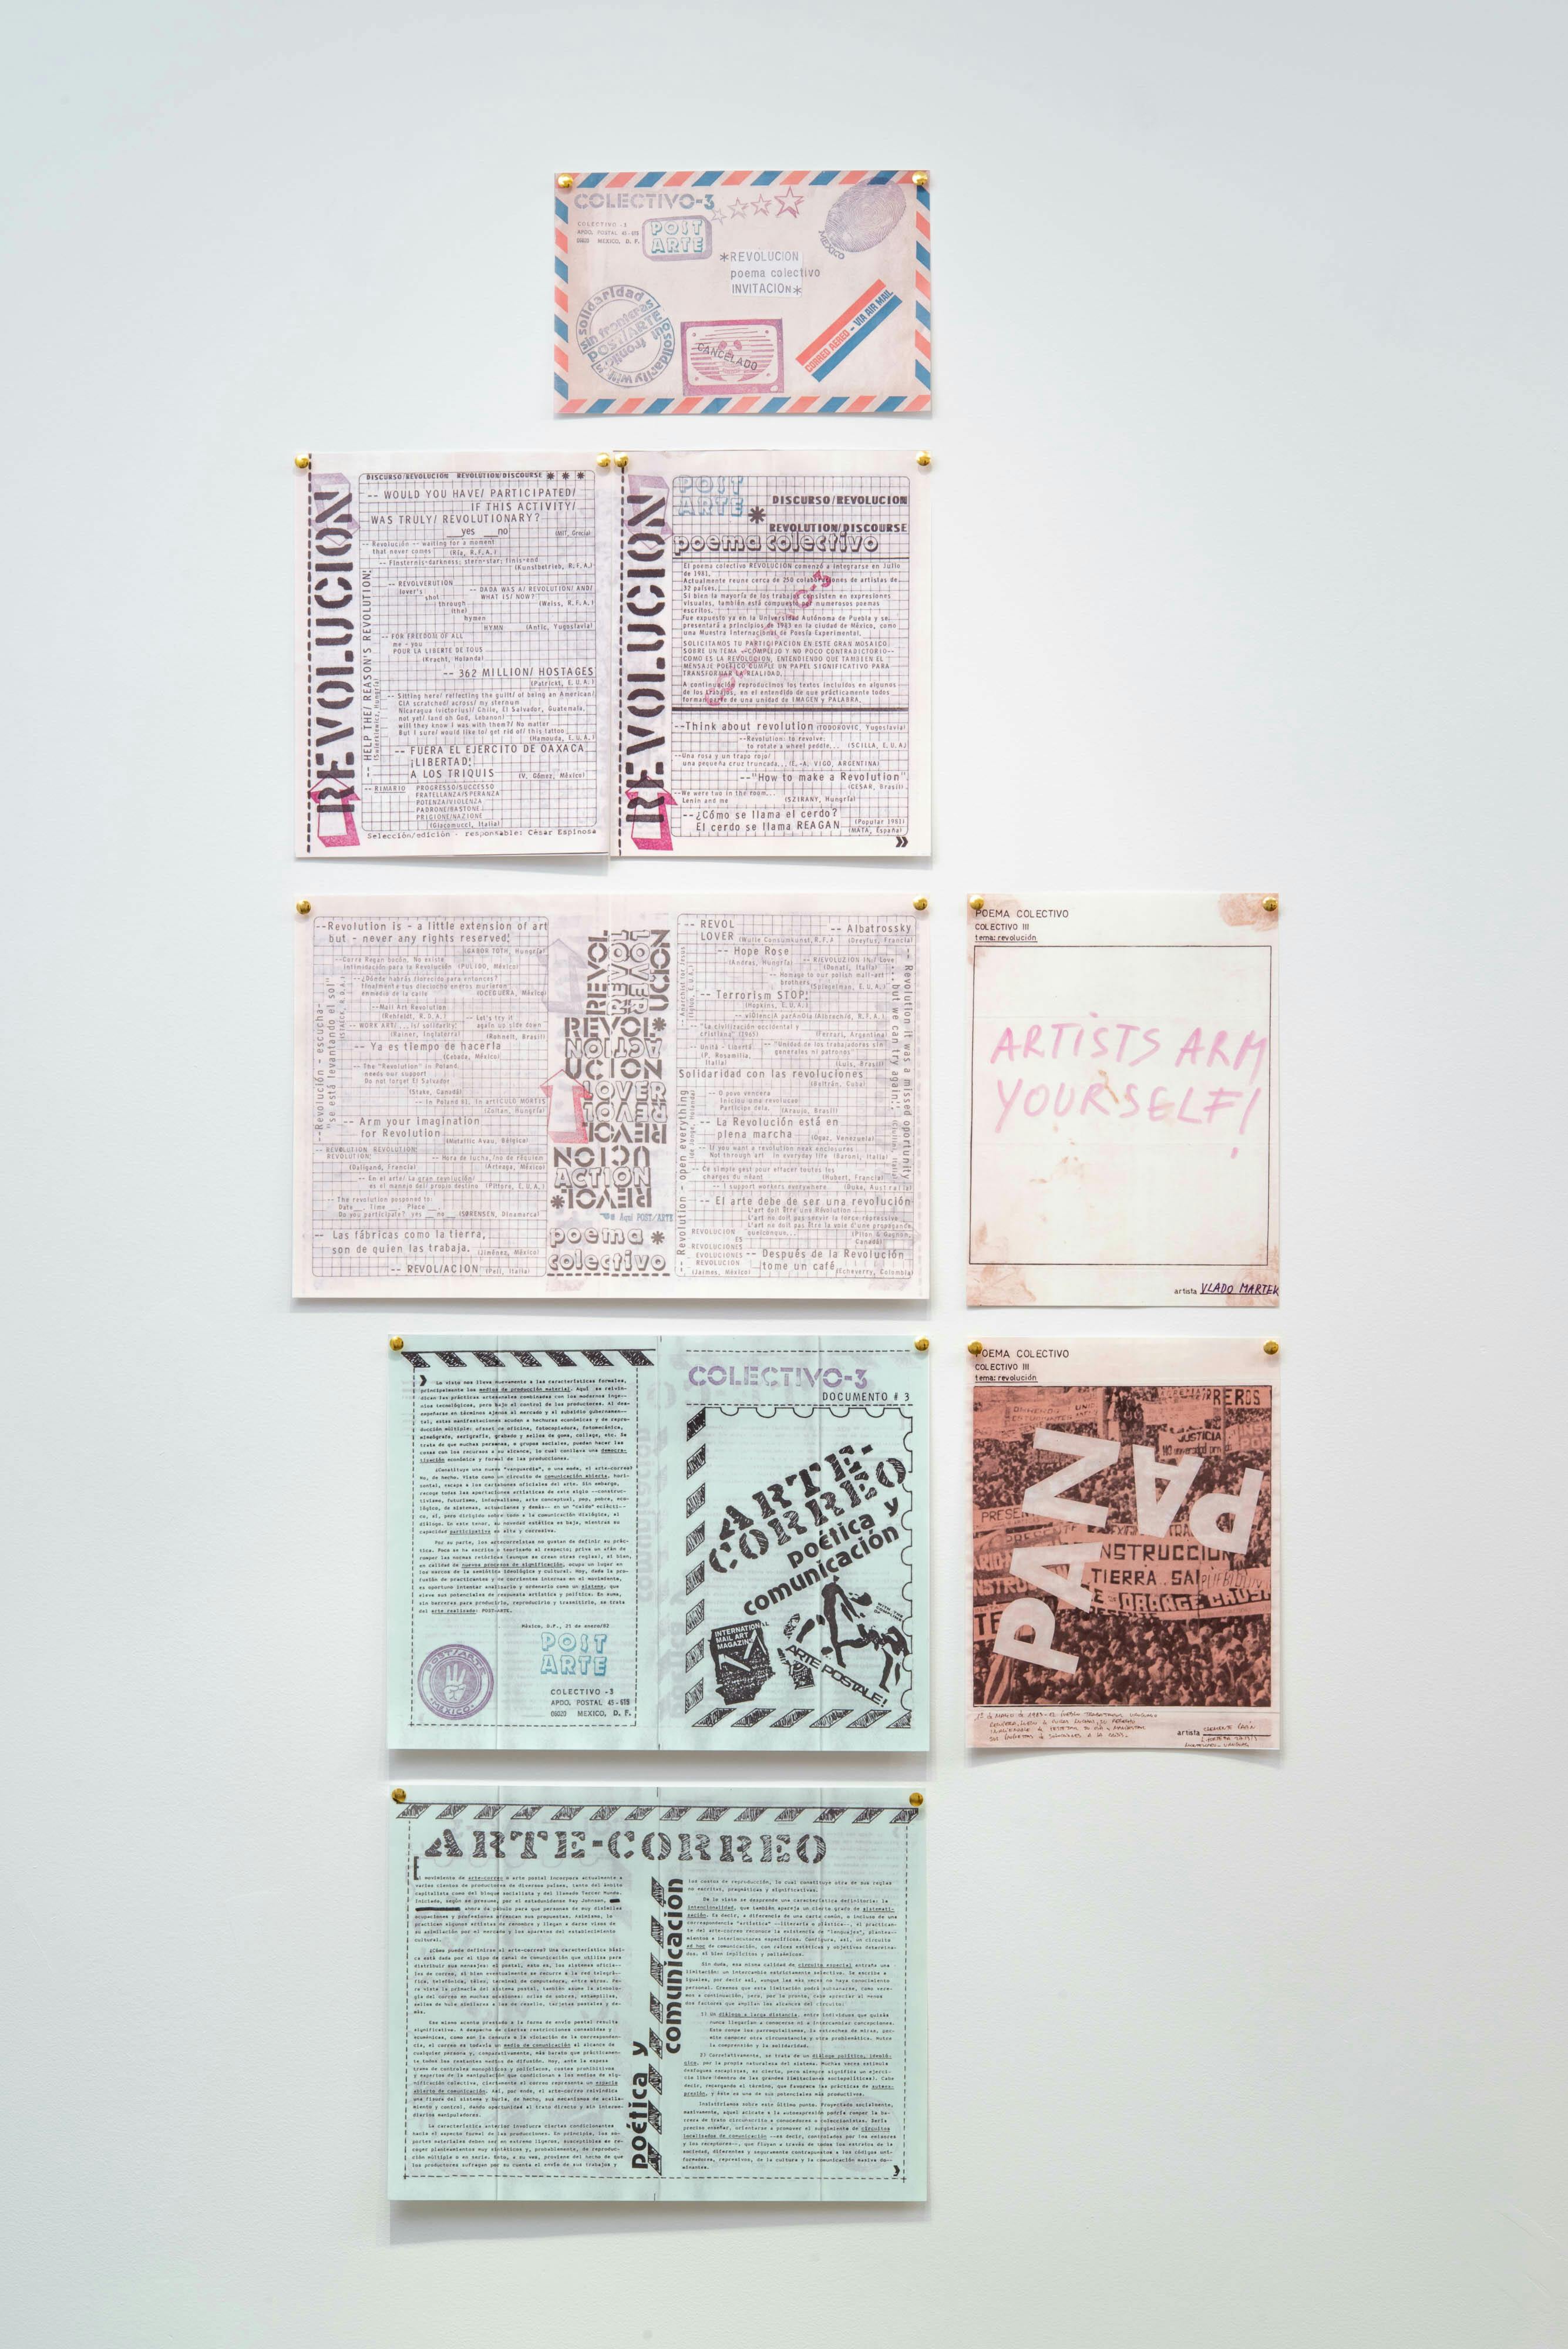 Image of Poema Colectivo Revolución exhibition showing a closer view collages of the same size on the gallery walls.